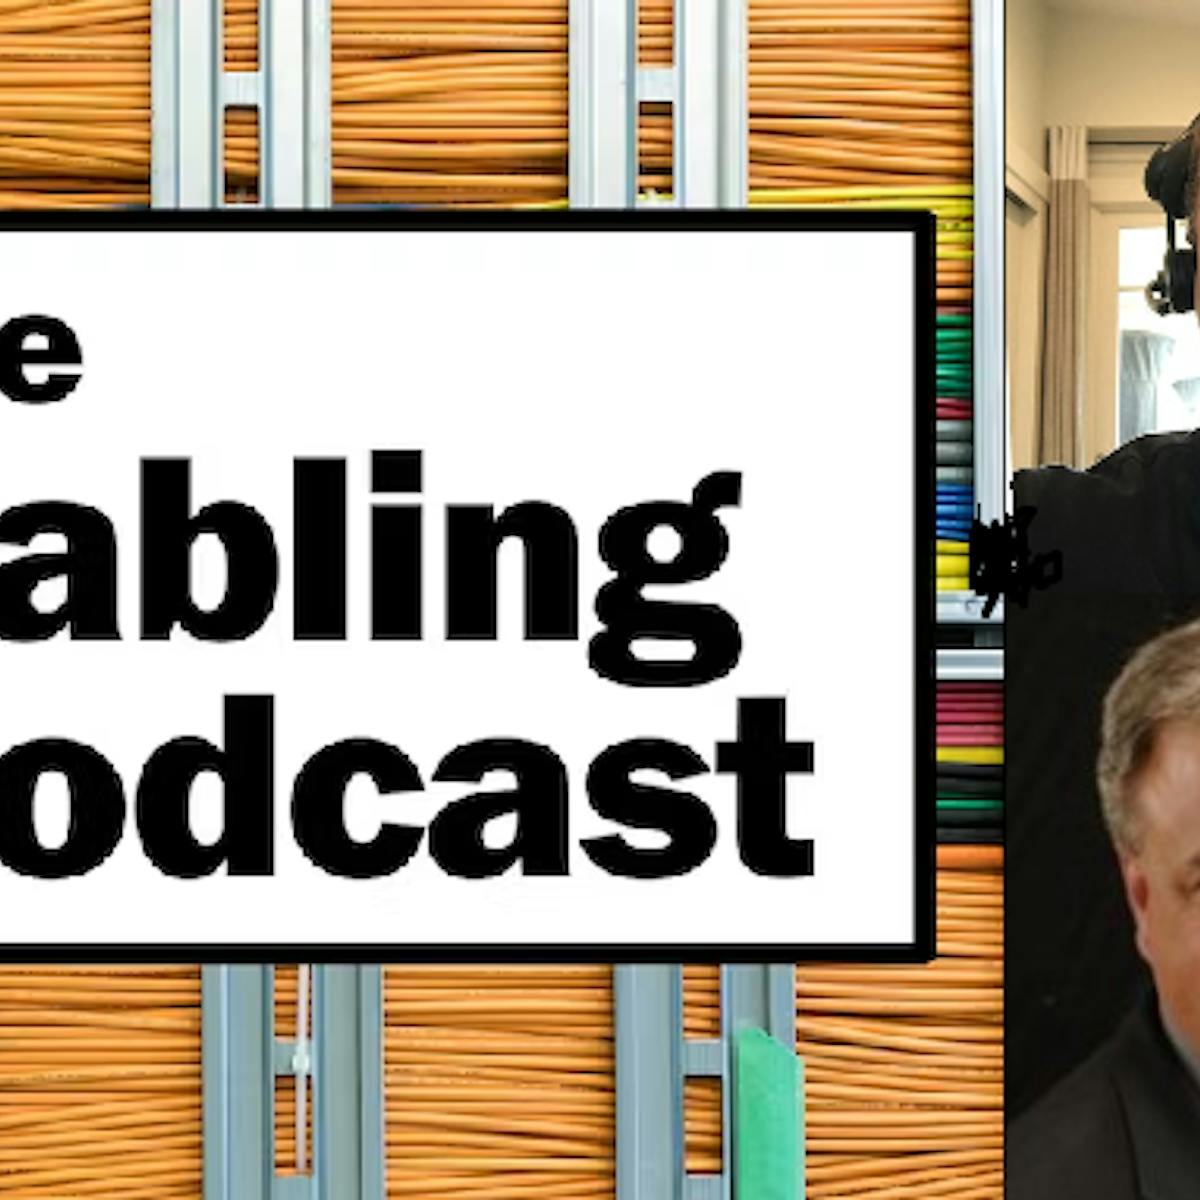 Cabling Podcast Ieeesa